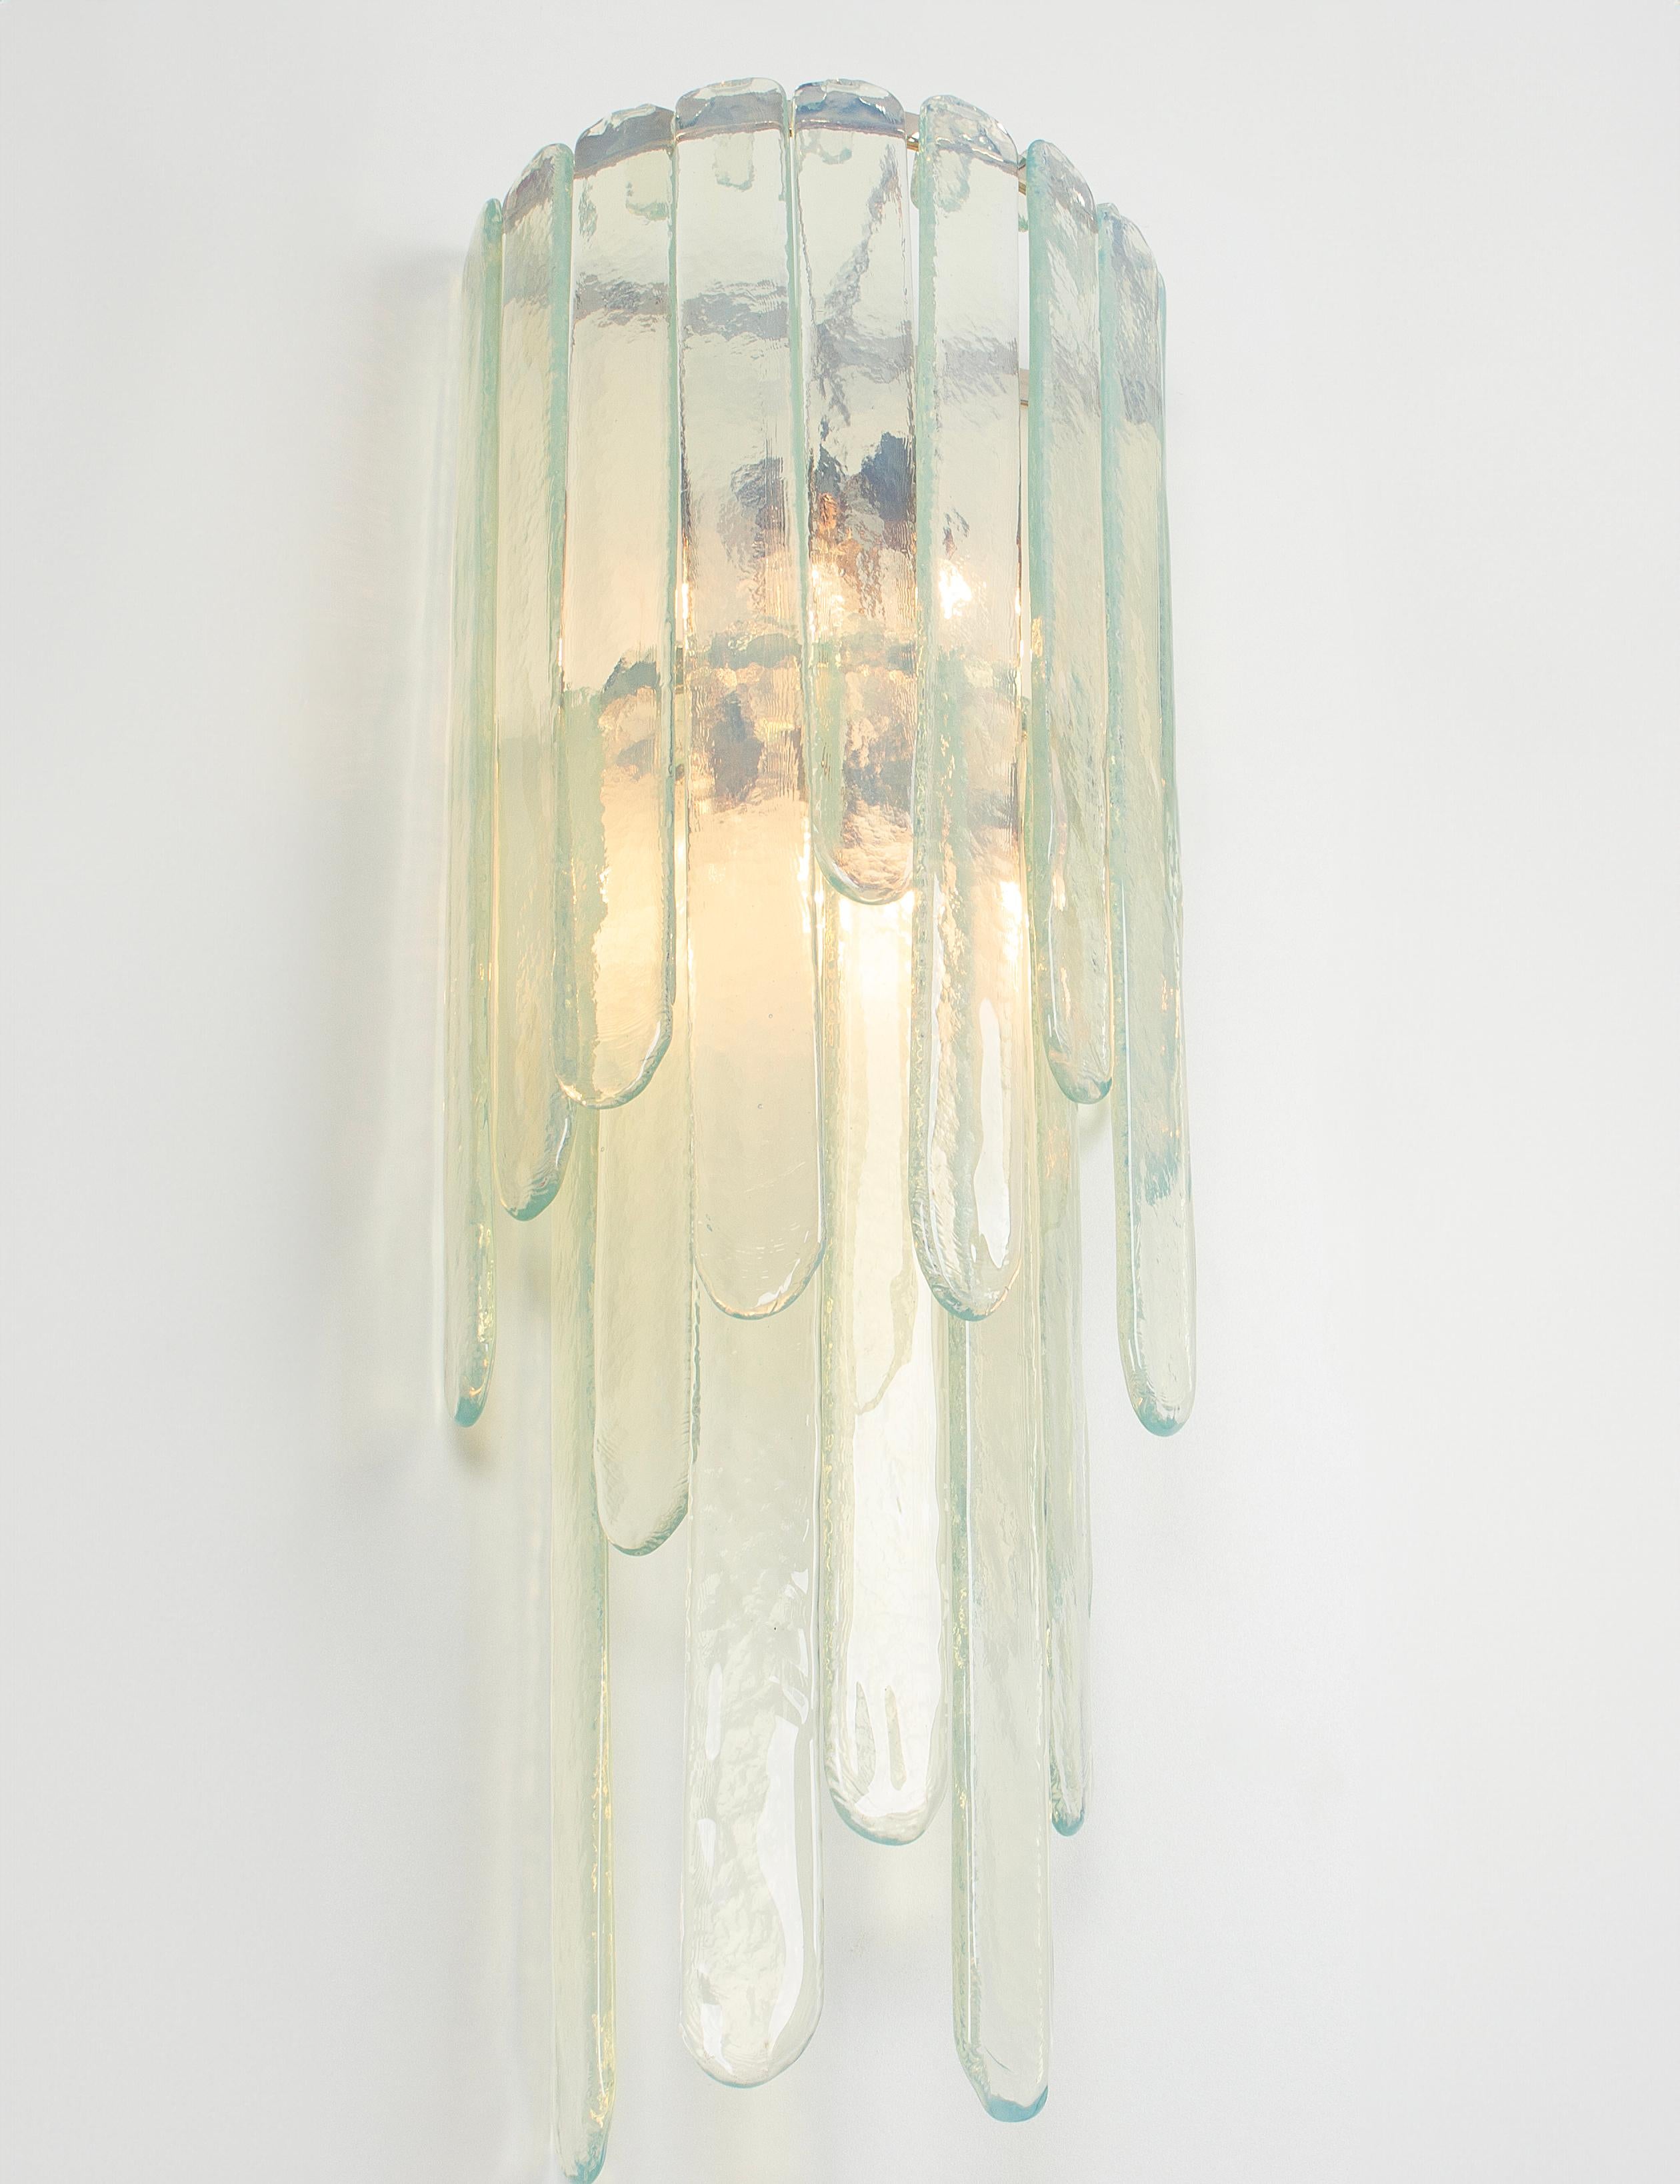 Extra Large Blue Murano Glass Wall Lamp by Carlo Nason for Mazzega, Italy, 1970s For Sale 6